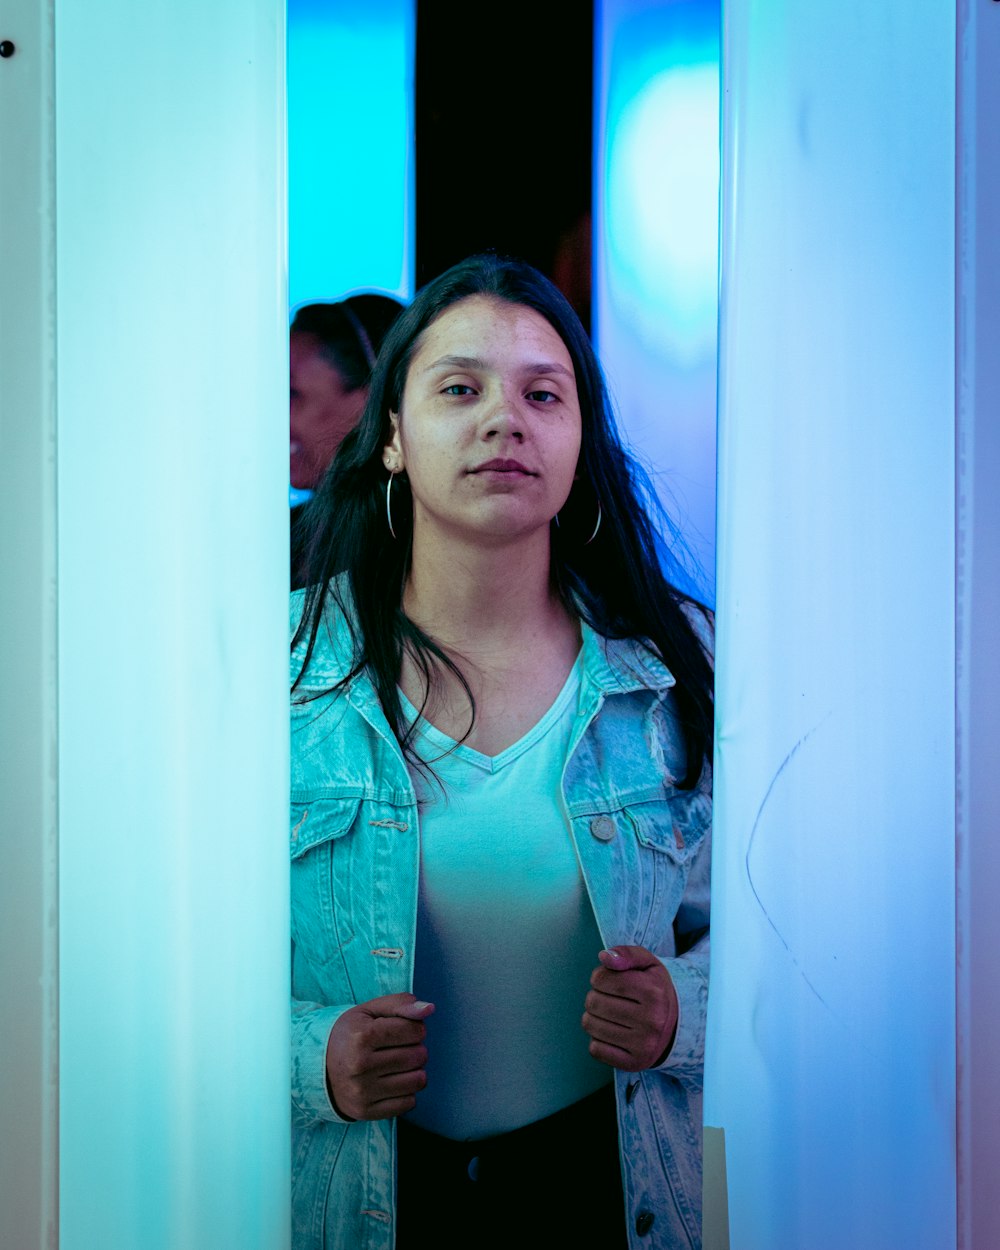 a woman standing in a room with a blue light behind her